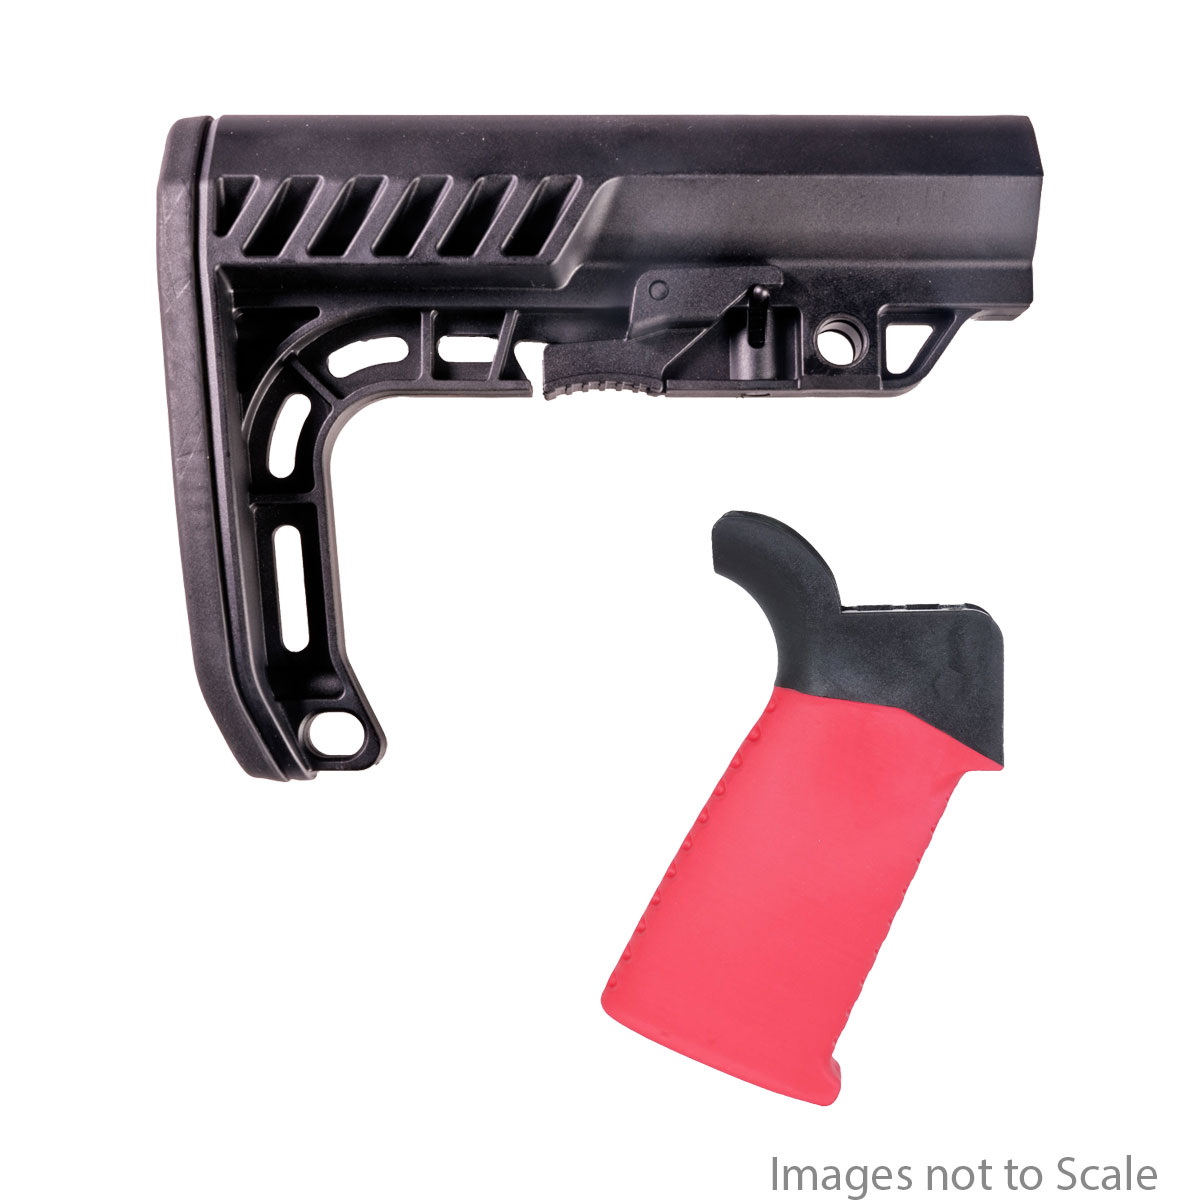 Furniture Upgrade Kit: Team Accessories Corp AR15 Grip Window Grip Flared Smooth/Ribbed Red + Gauntlet Arms Minimalist AR-15 Stock